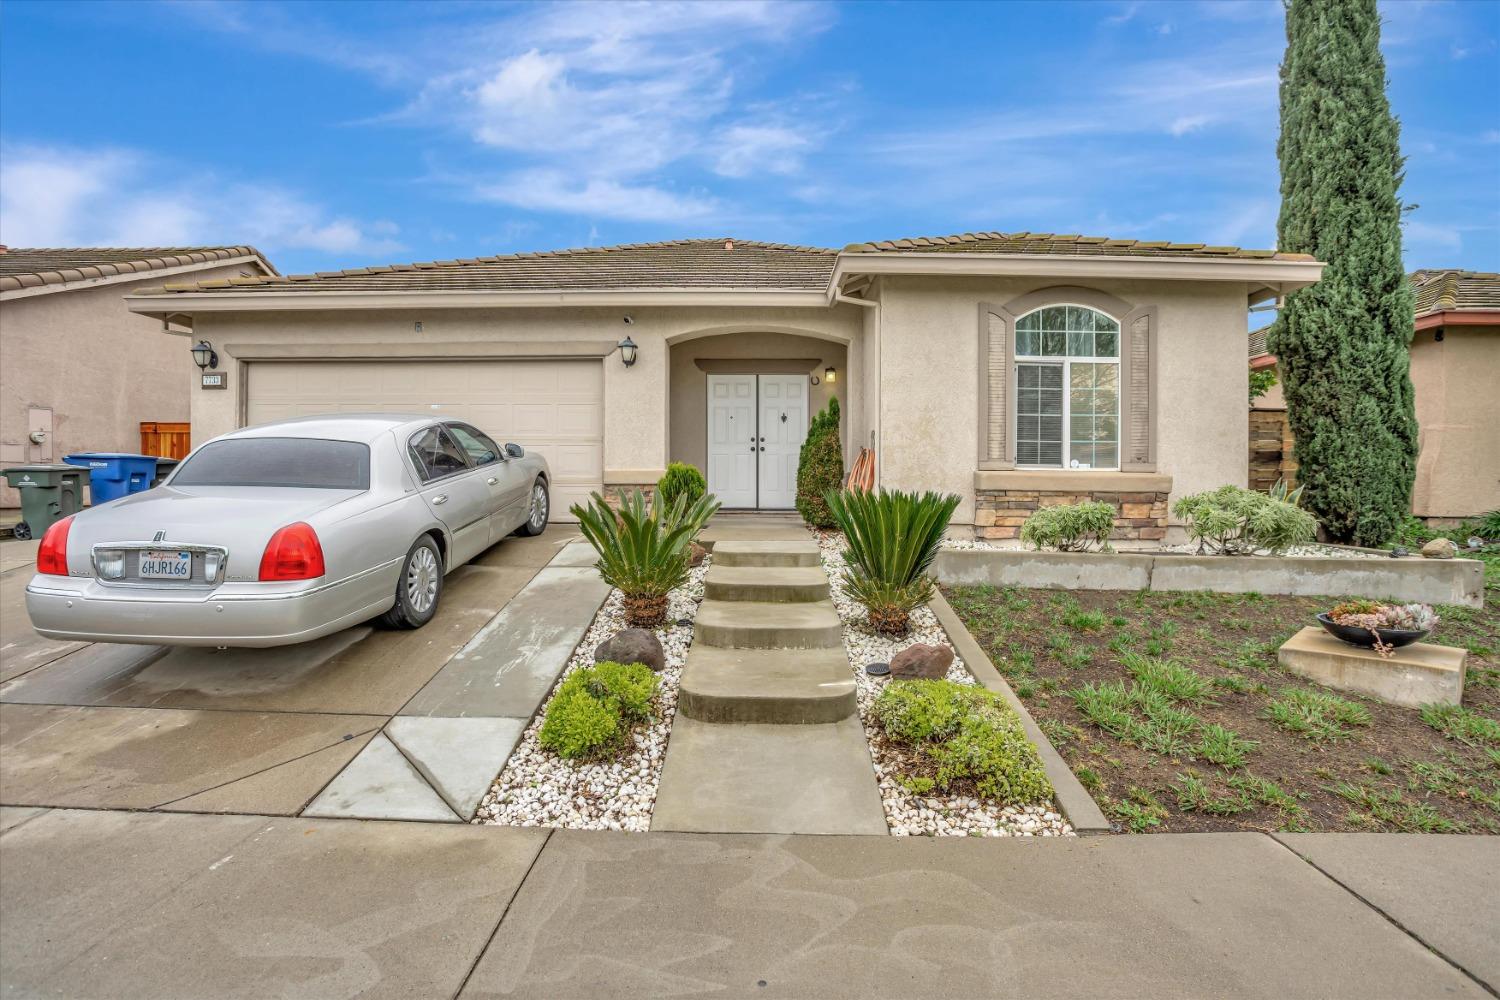 Photo of 7733 Manorside Dr in Sacramento, CA